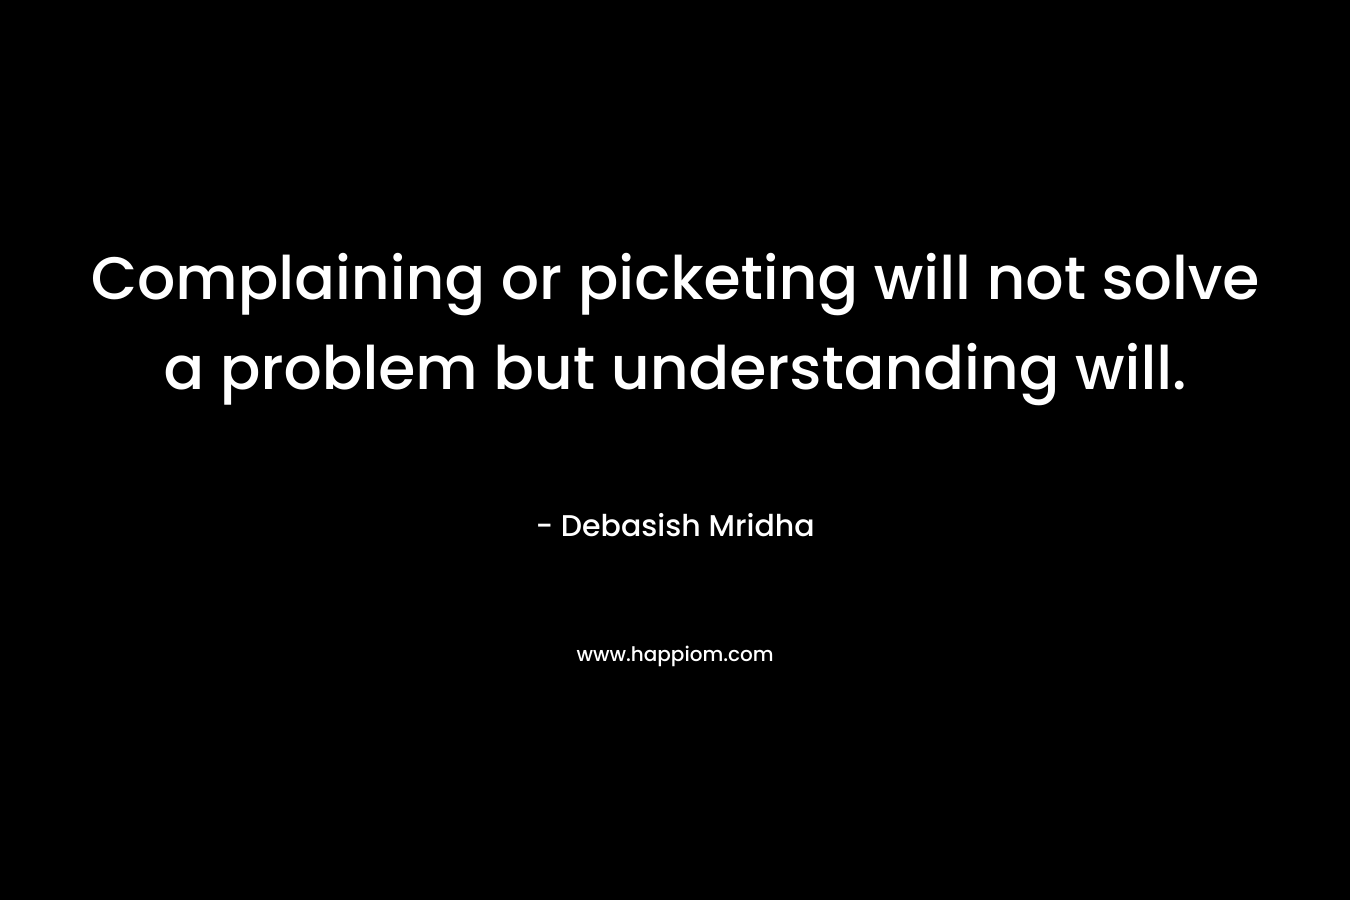 Complaining or picketing will not solve a problem but understanding will.